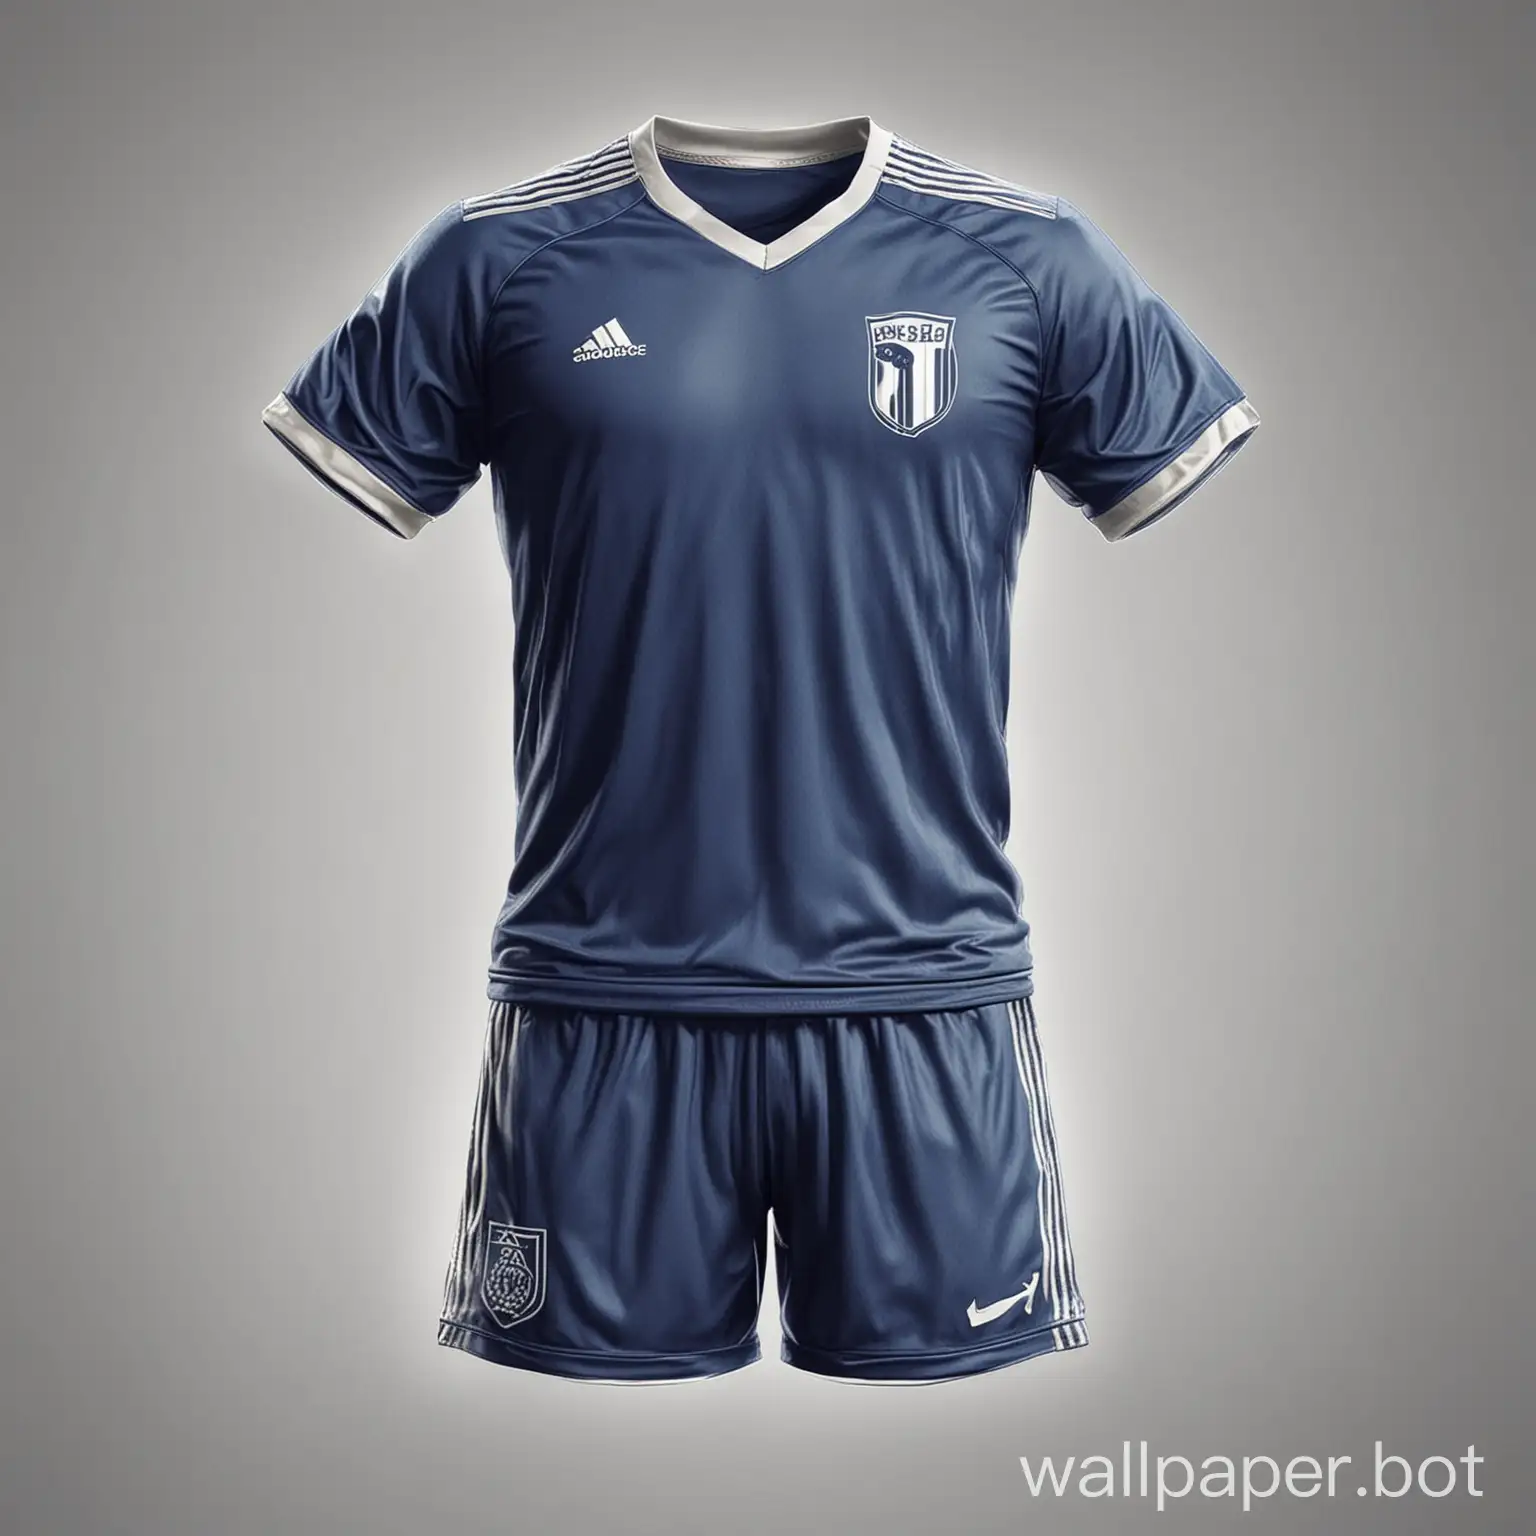 blue soccer uniform with white stripes on a white background sketch concept